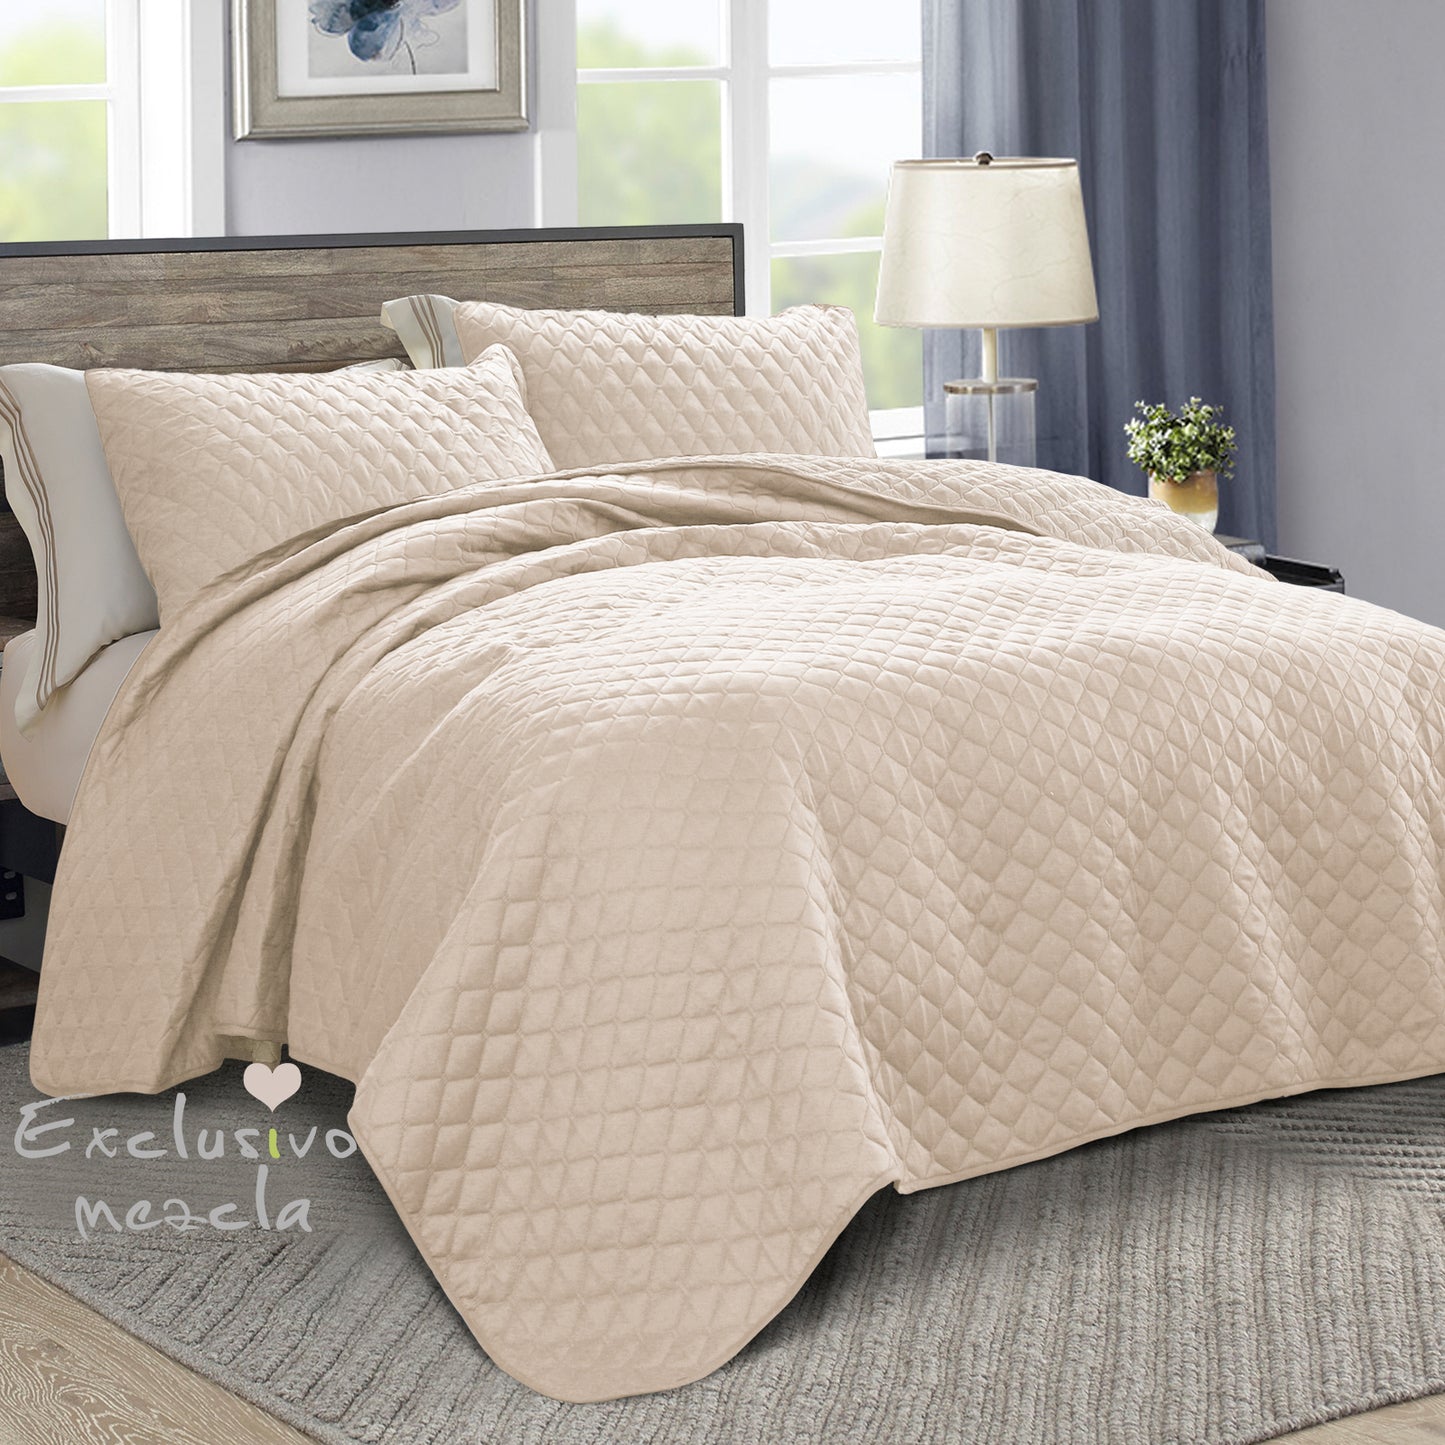 Exclusivo Mezcla Ultrasonic Reversible King Size Quilt Bedding Set with Pillow Shams, Lightweight Quilts King Size, Soft Bedspreads Bed Coverlets for All Seasons - (Brich Beige, 104"x96")